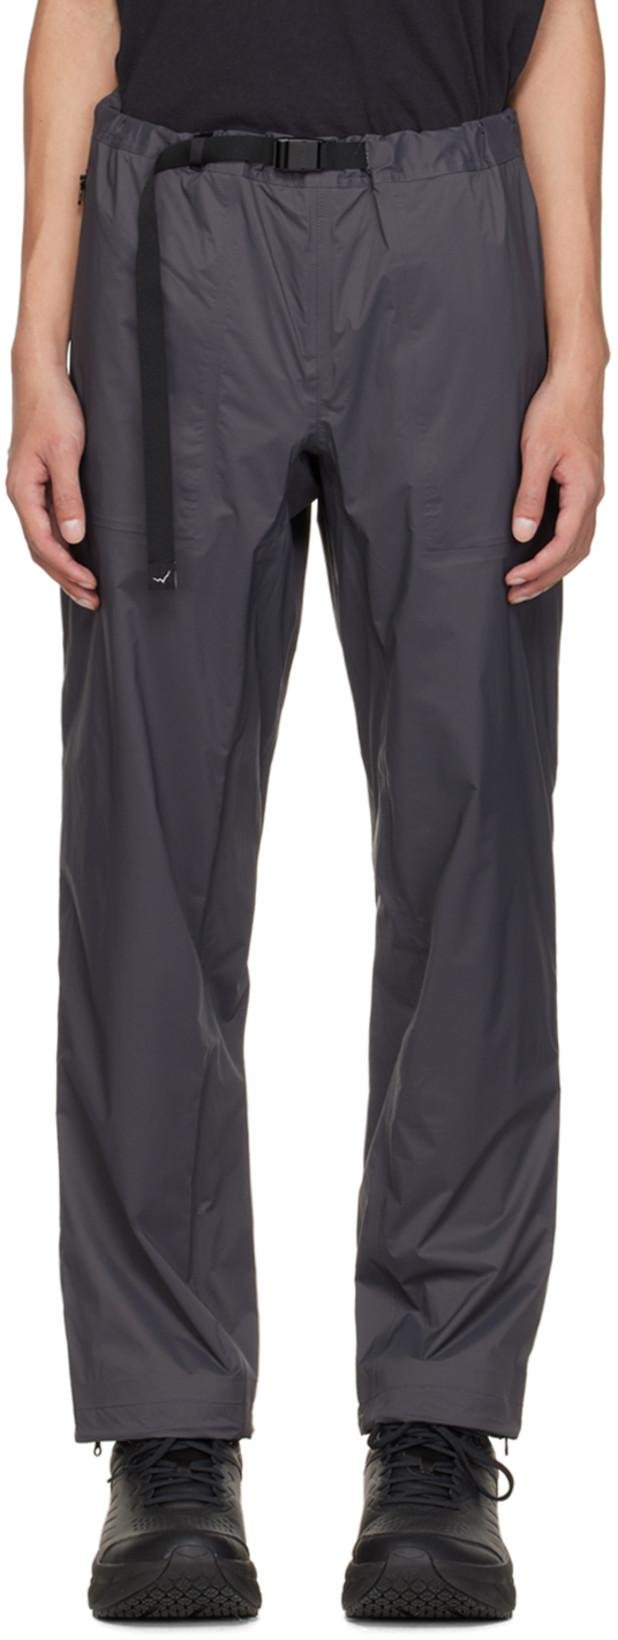 Gray 2.5L Trousers by CAYL